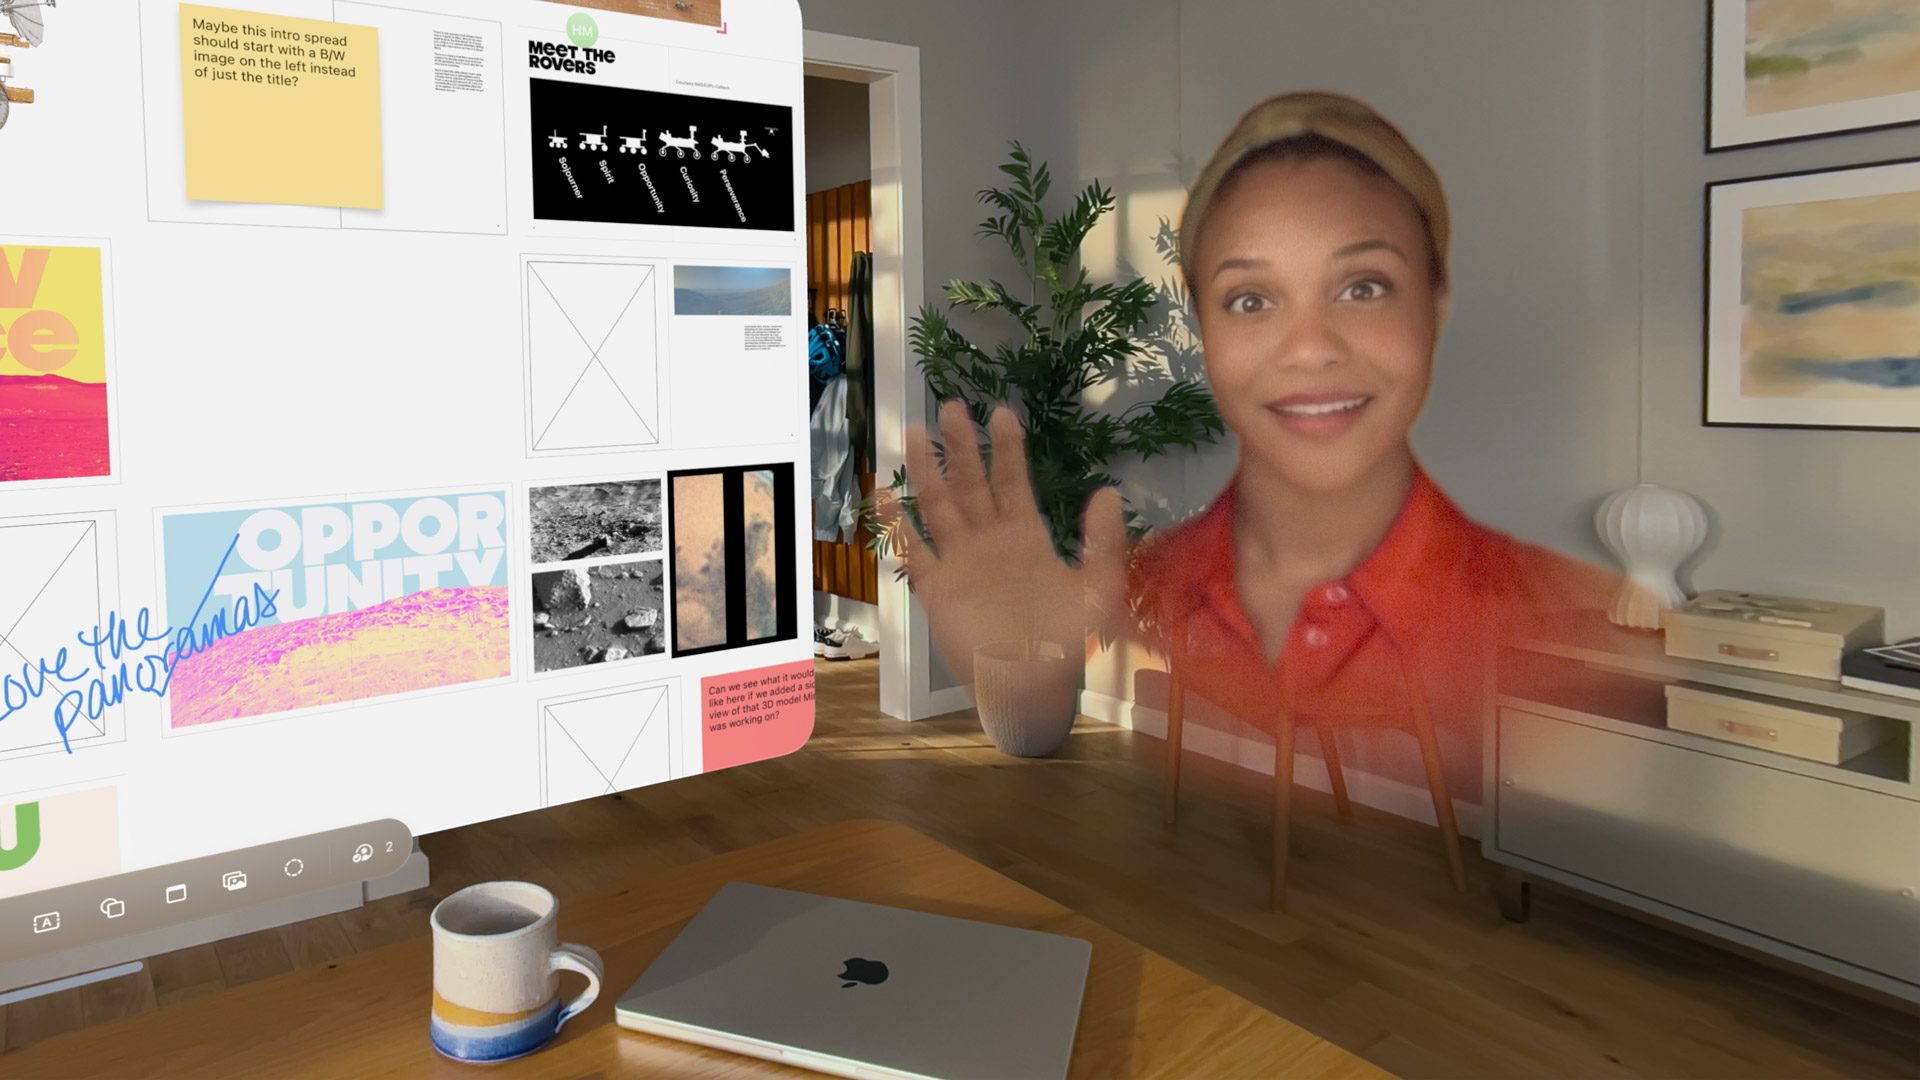 Apple Upgrades Personas for True Face-to-face Chats on Vision Pro